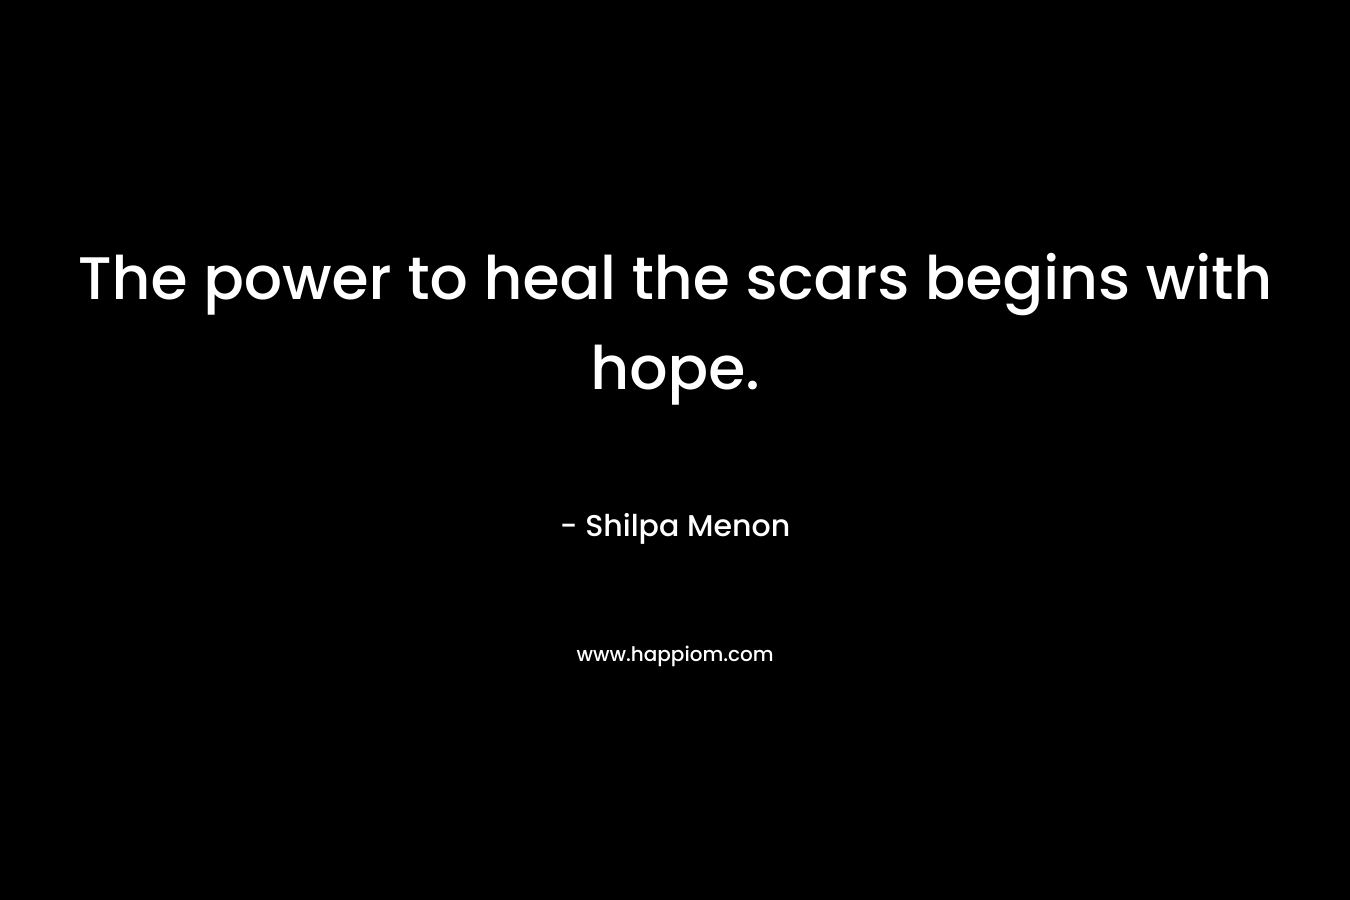 The power to heal the scars begins with hope. – Shilpa Menon